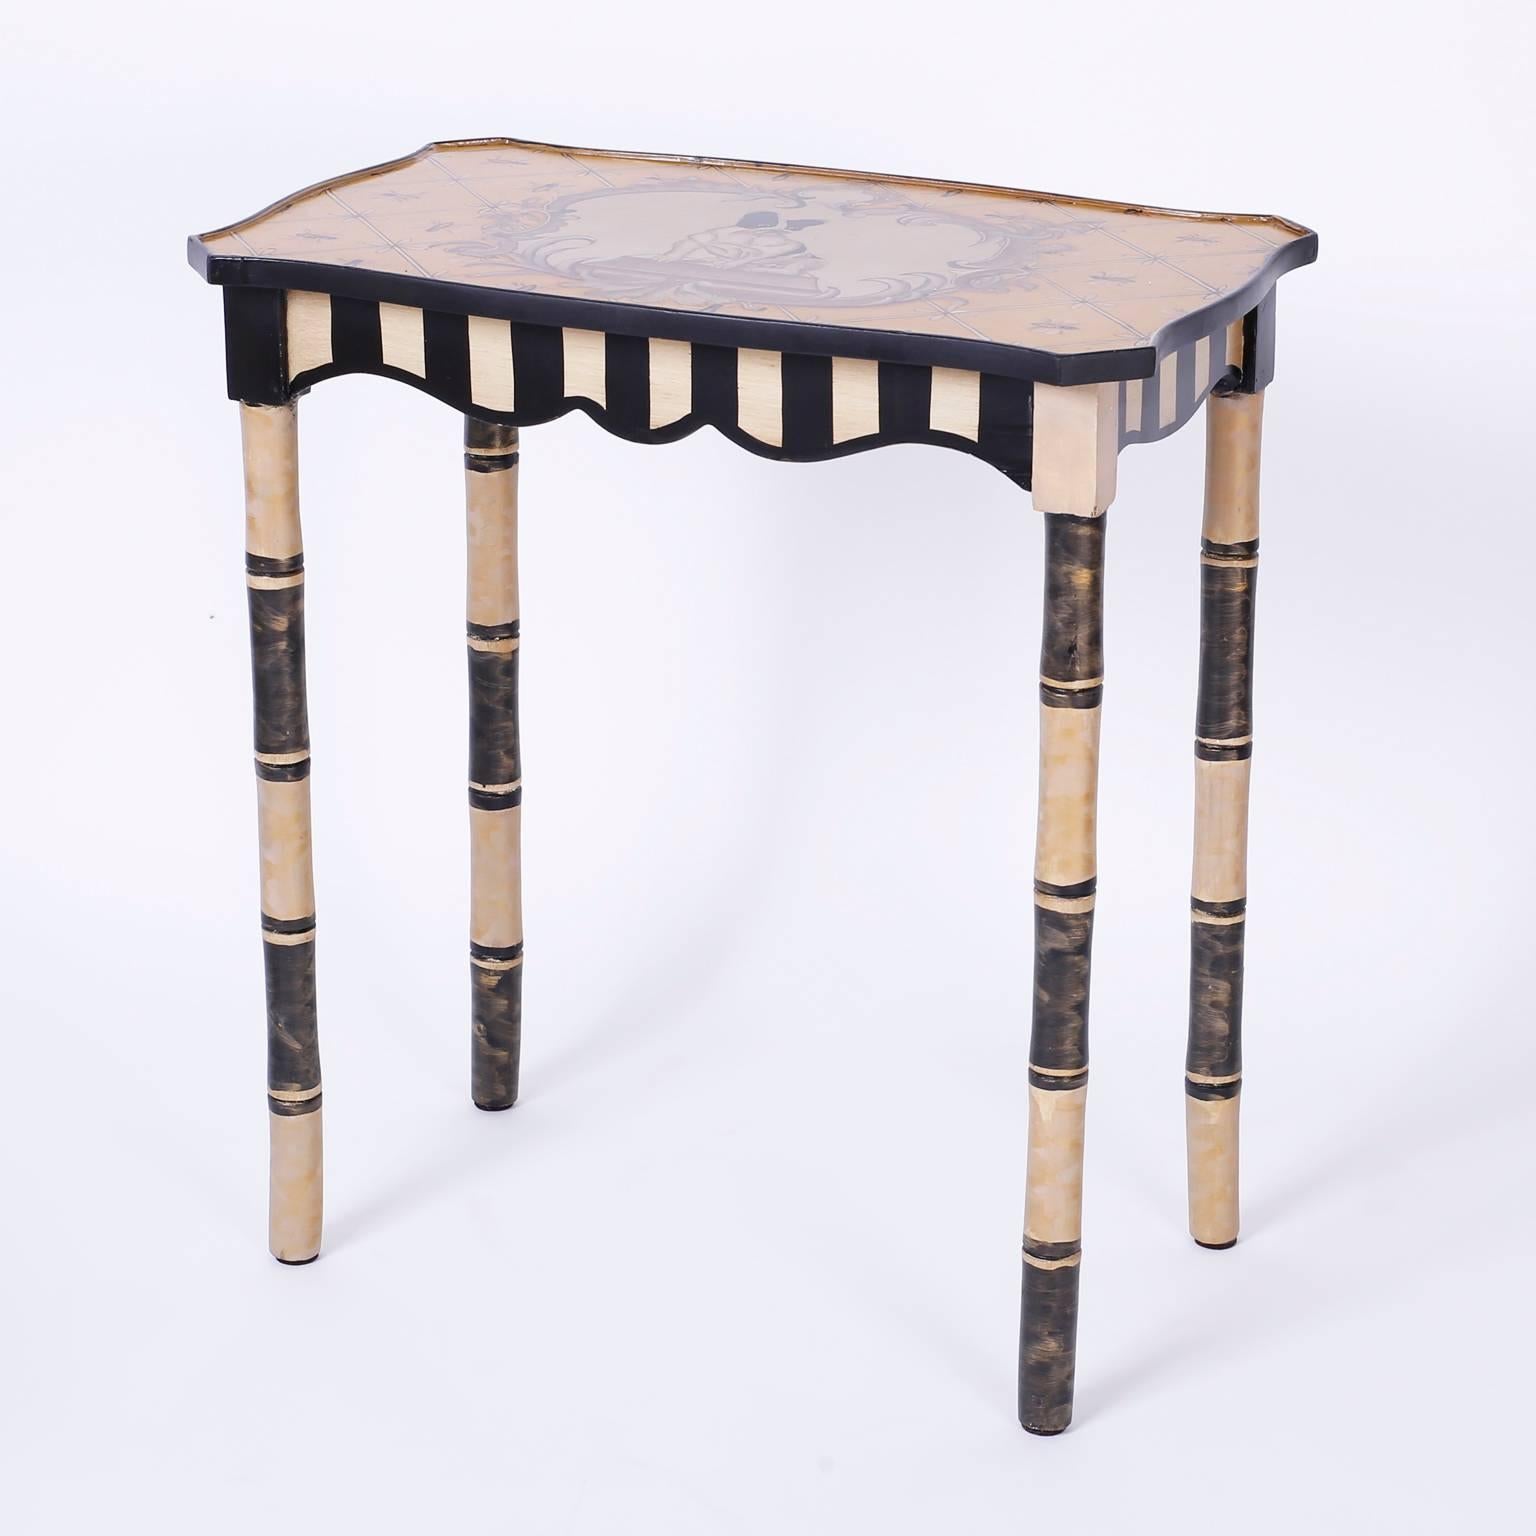 Wood Dog Themed Nesting Tables For Sale